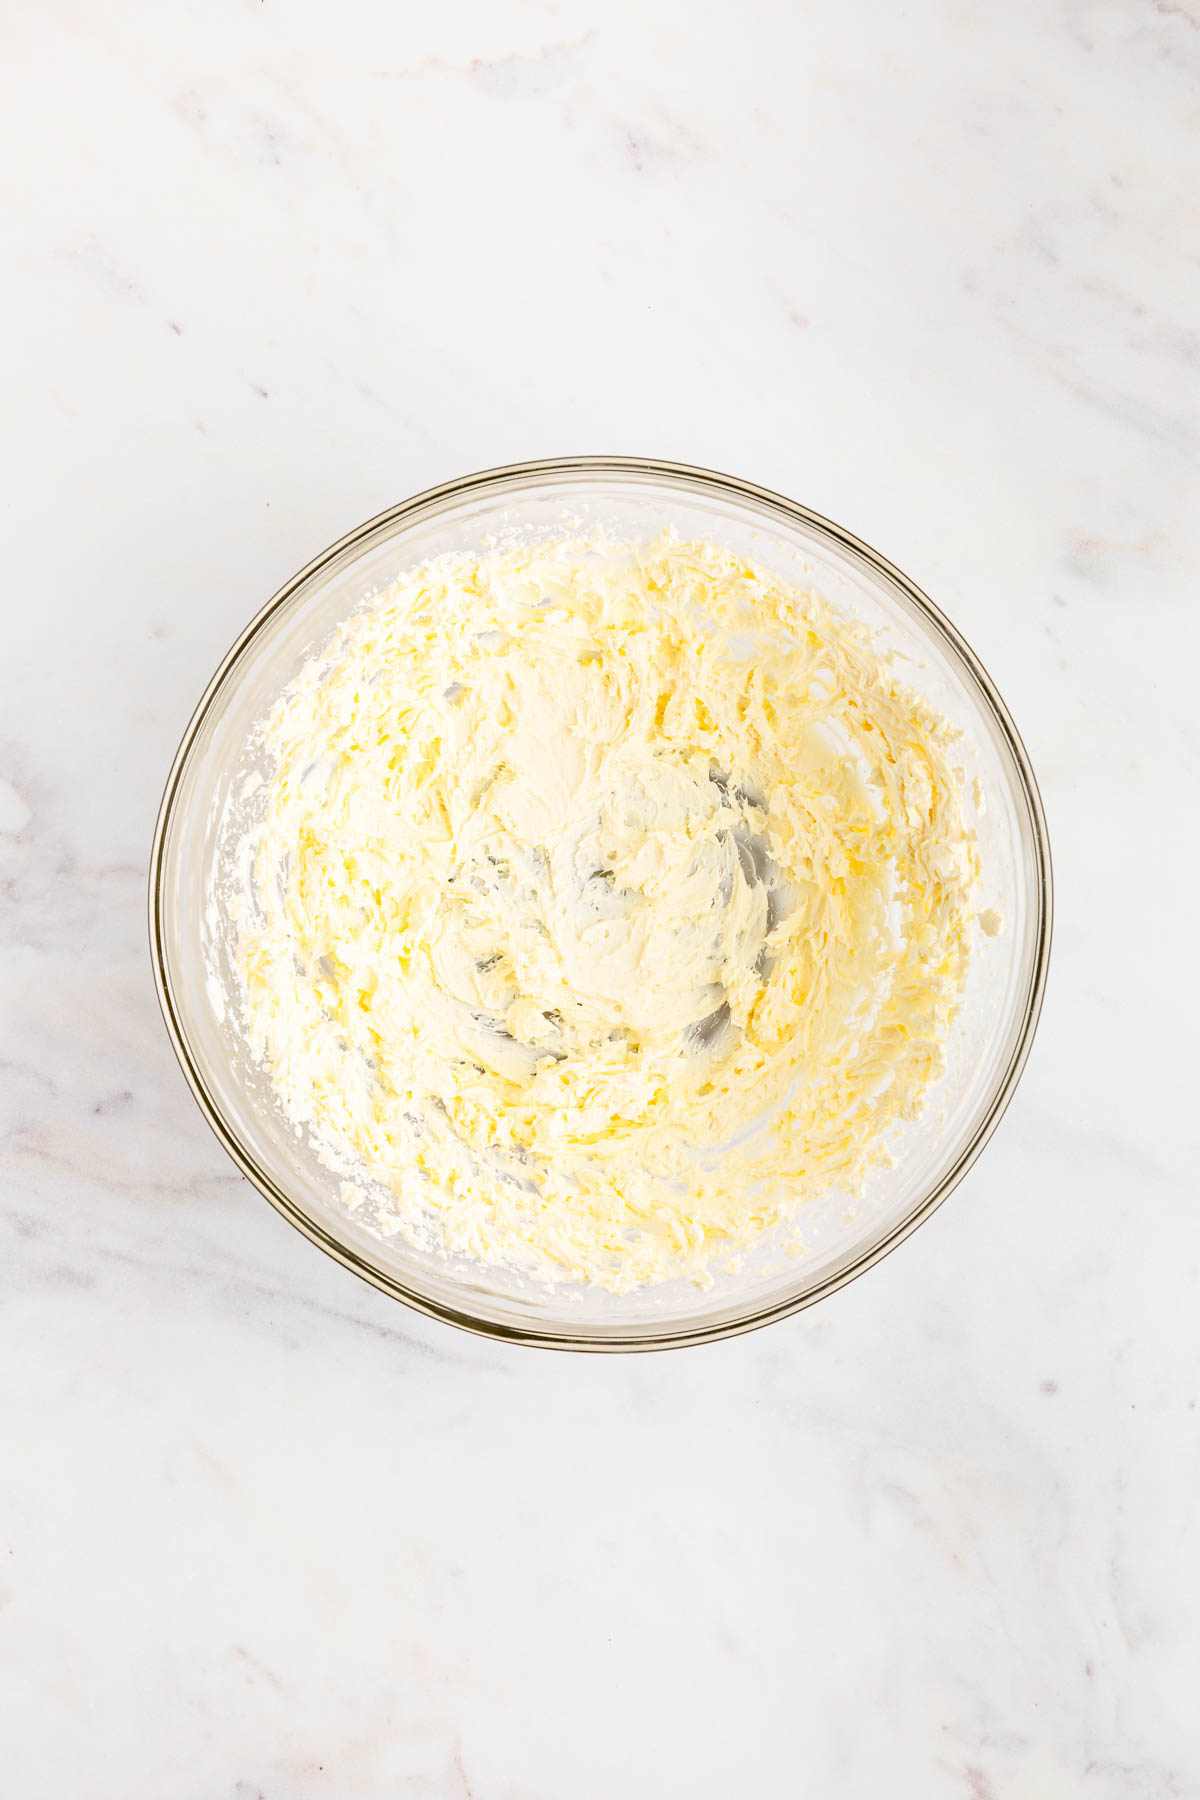 Cream cheese in a glass bowl on a marble surface.